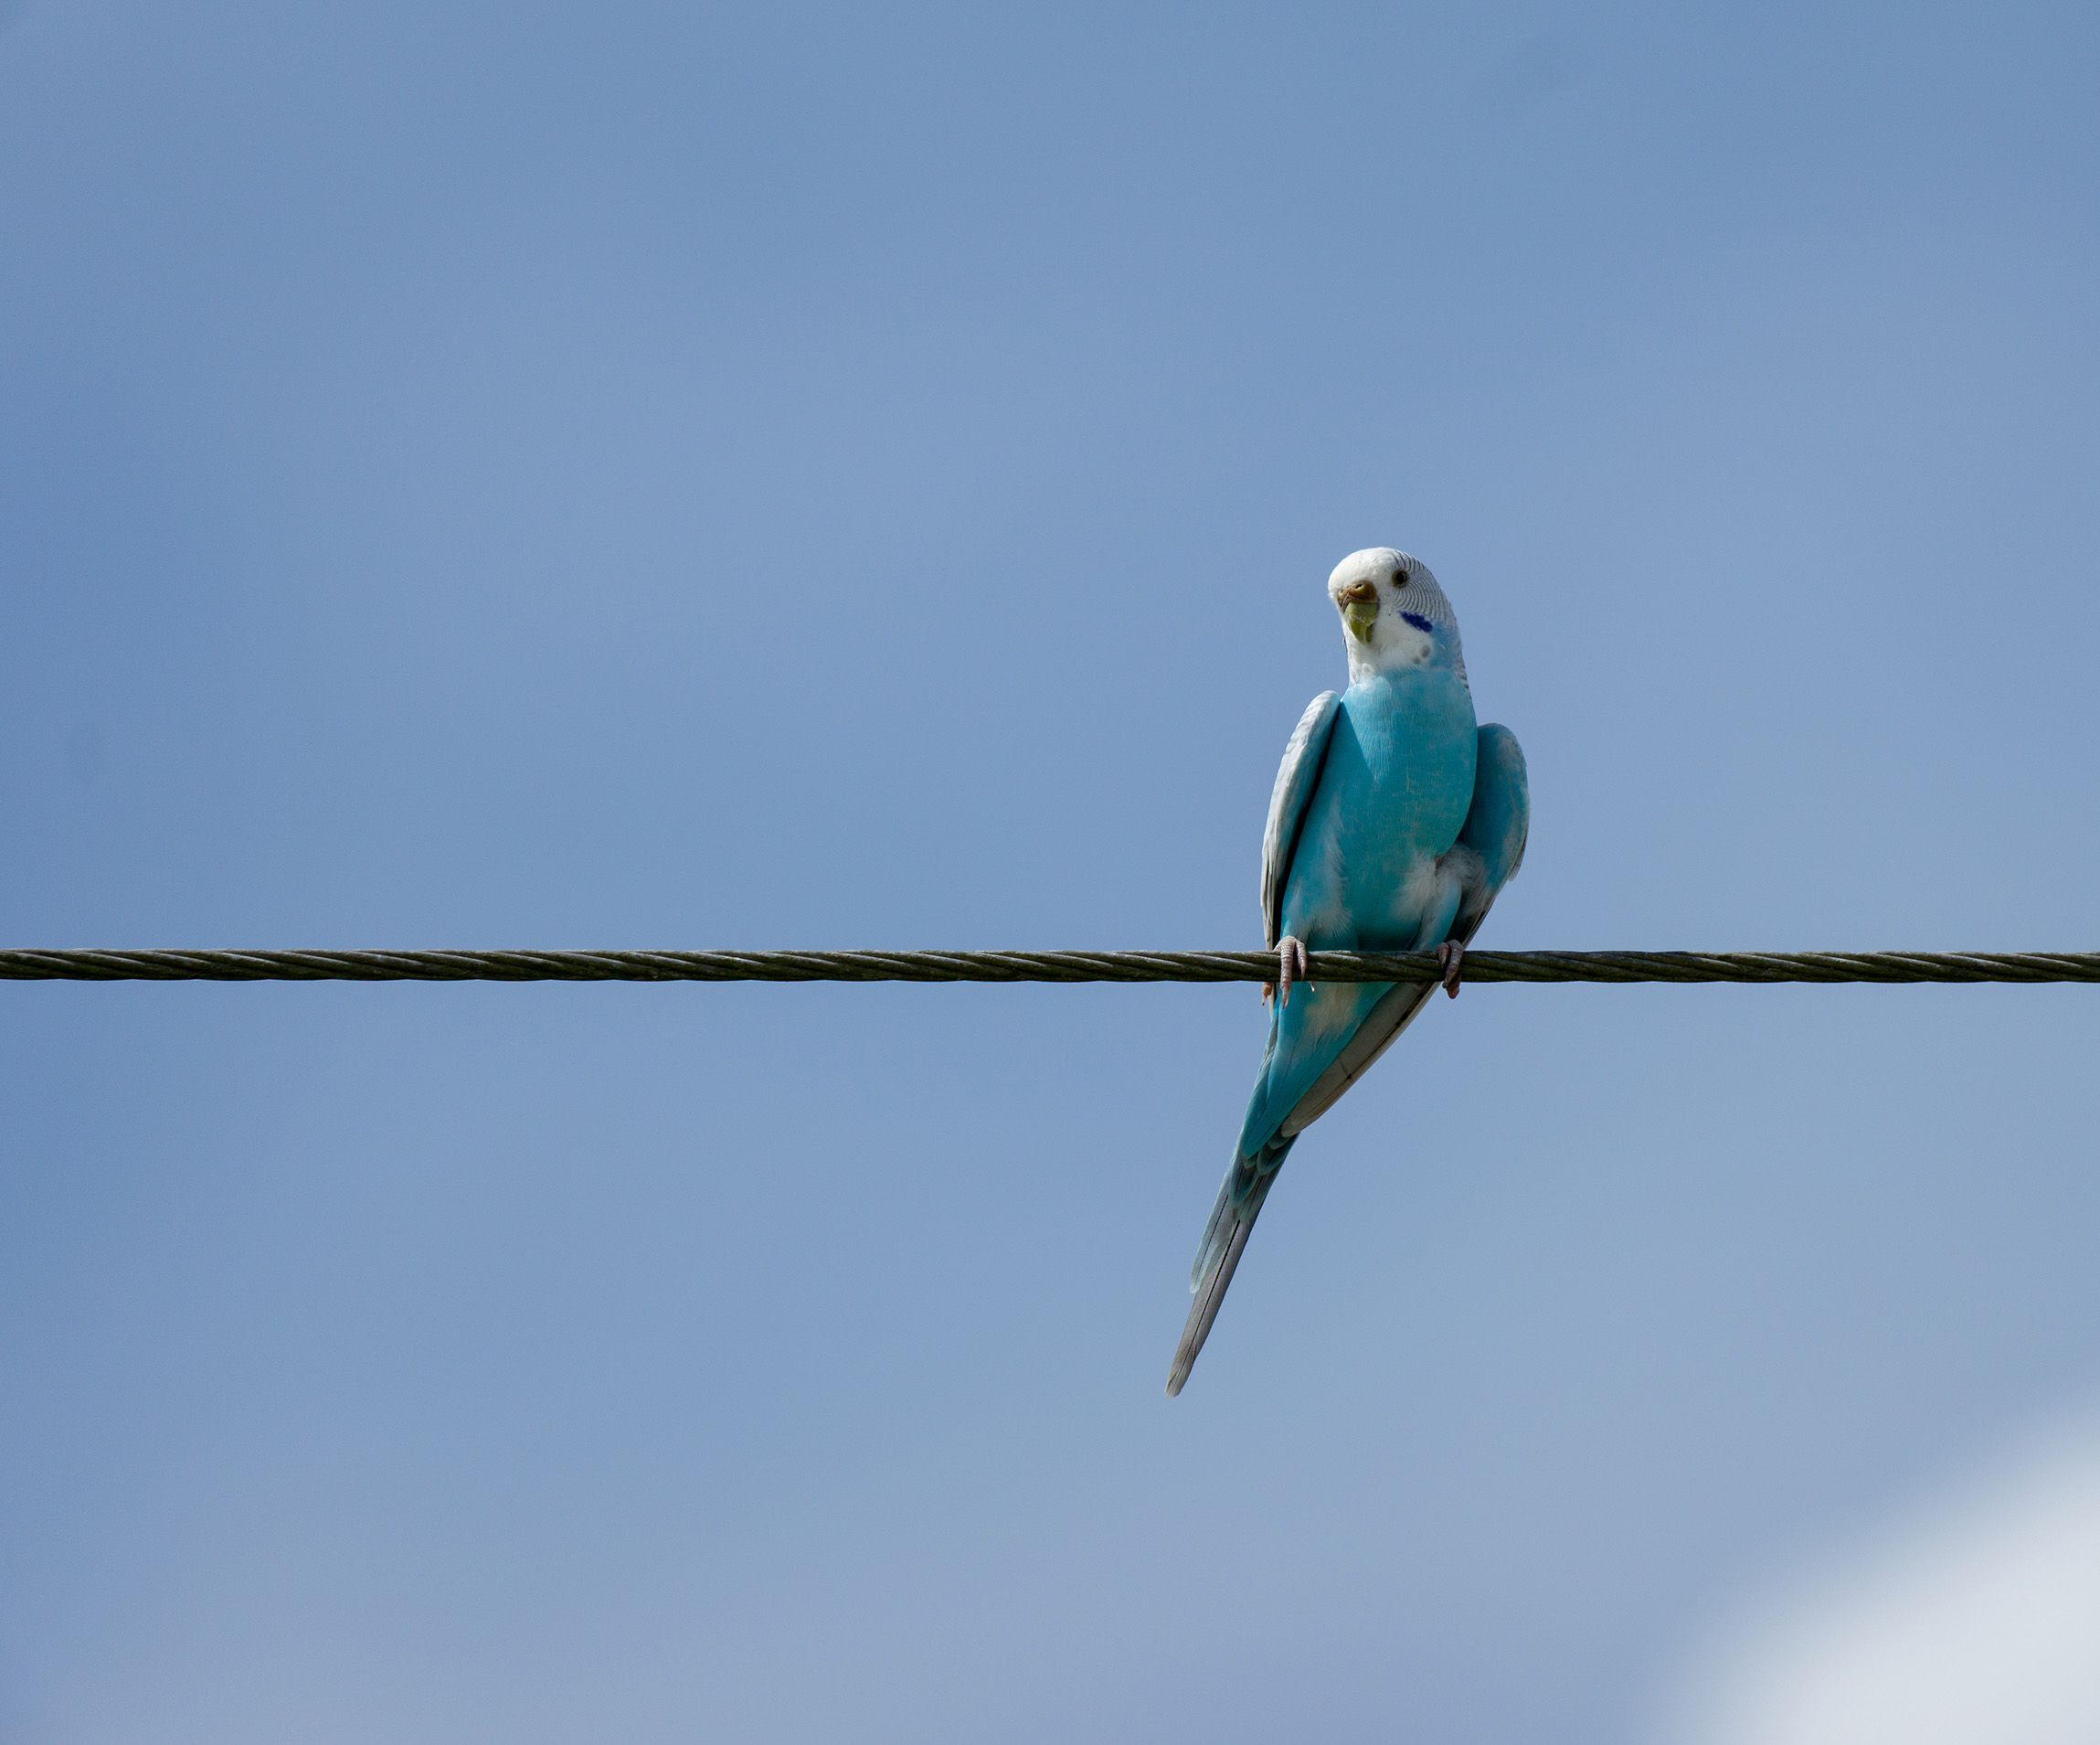 Parakeet sitting on a power line with blue sky behind him